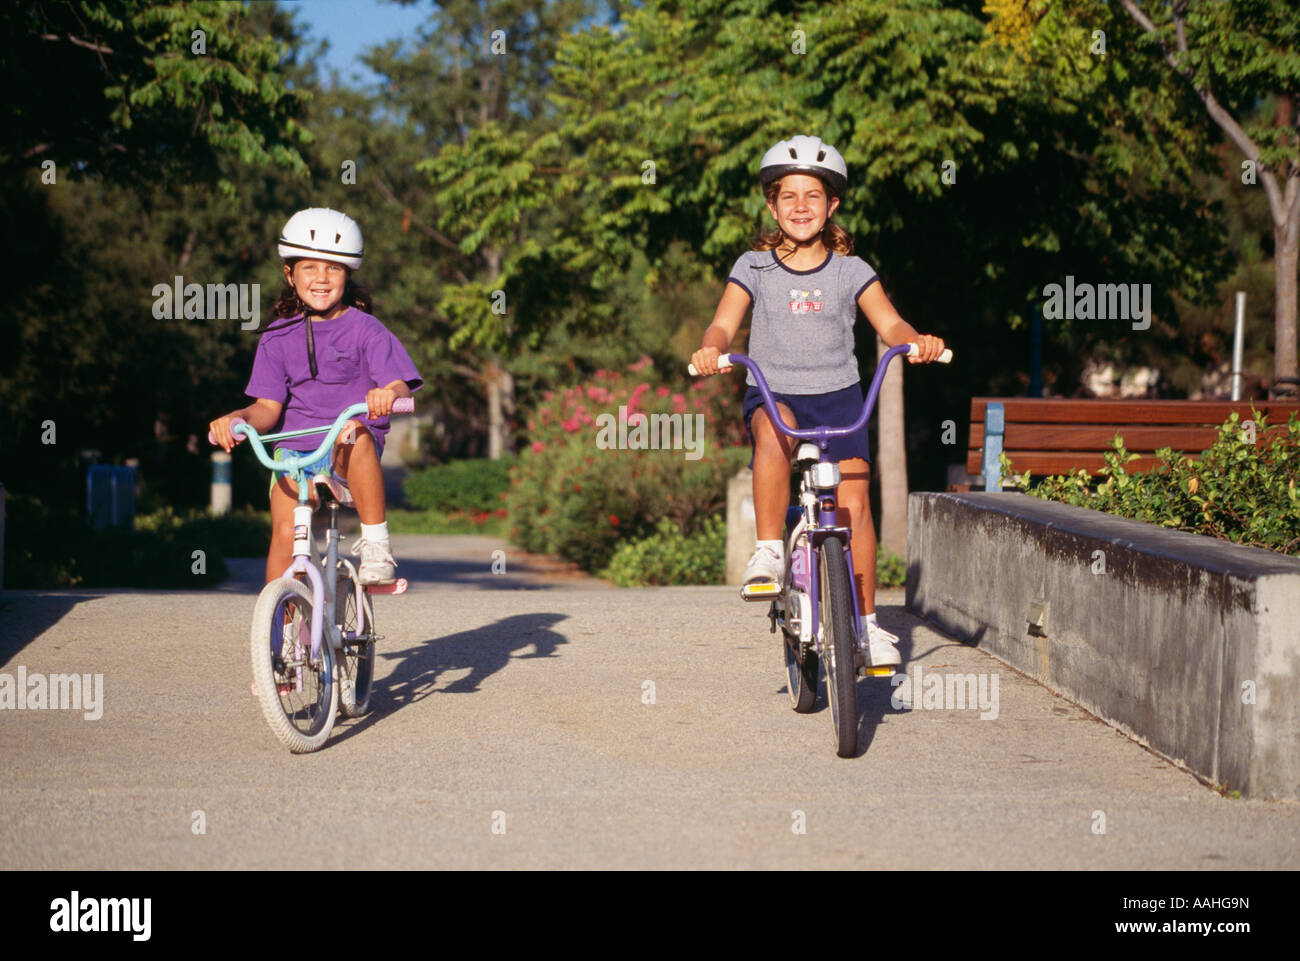 Girls children child riding bicycles bicycle bicycling  on bike bikes trail in park.Two Caucasian United States outdoor activity 5-6-7 year old ©Myrleen Pearson Stock Photo